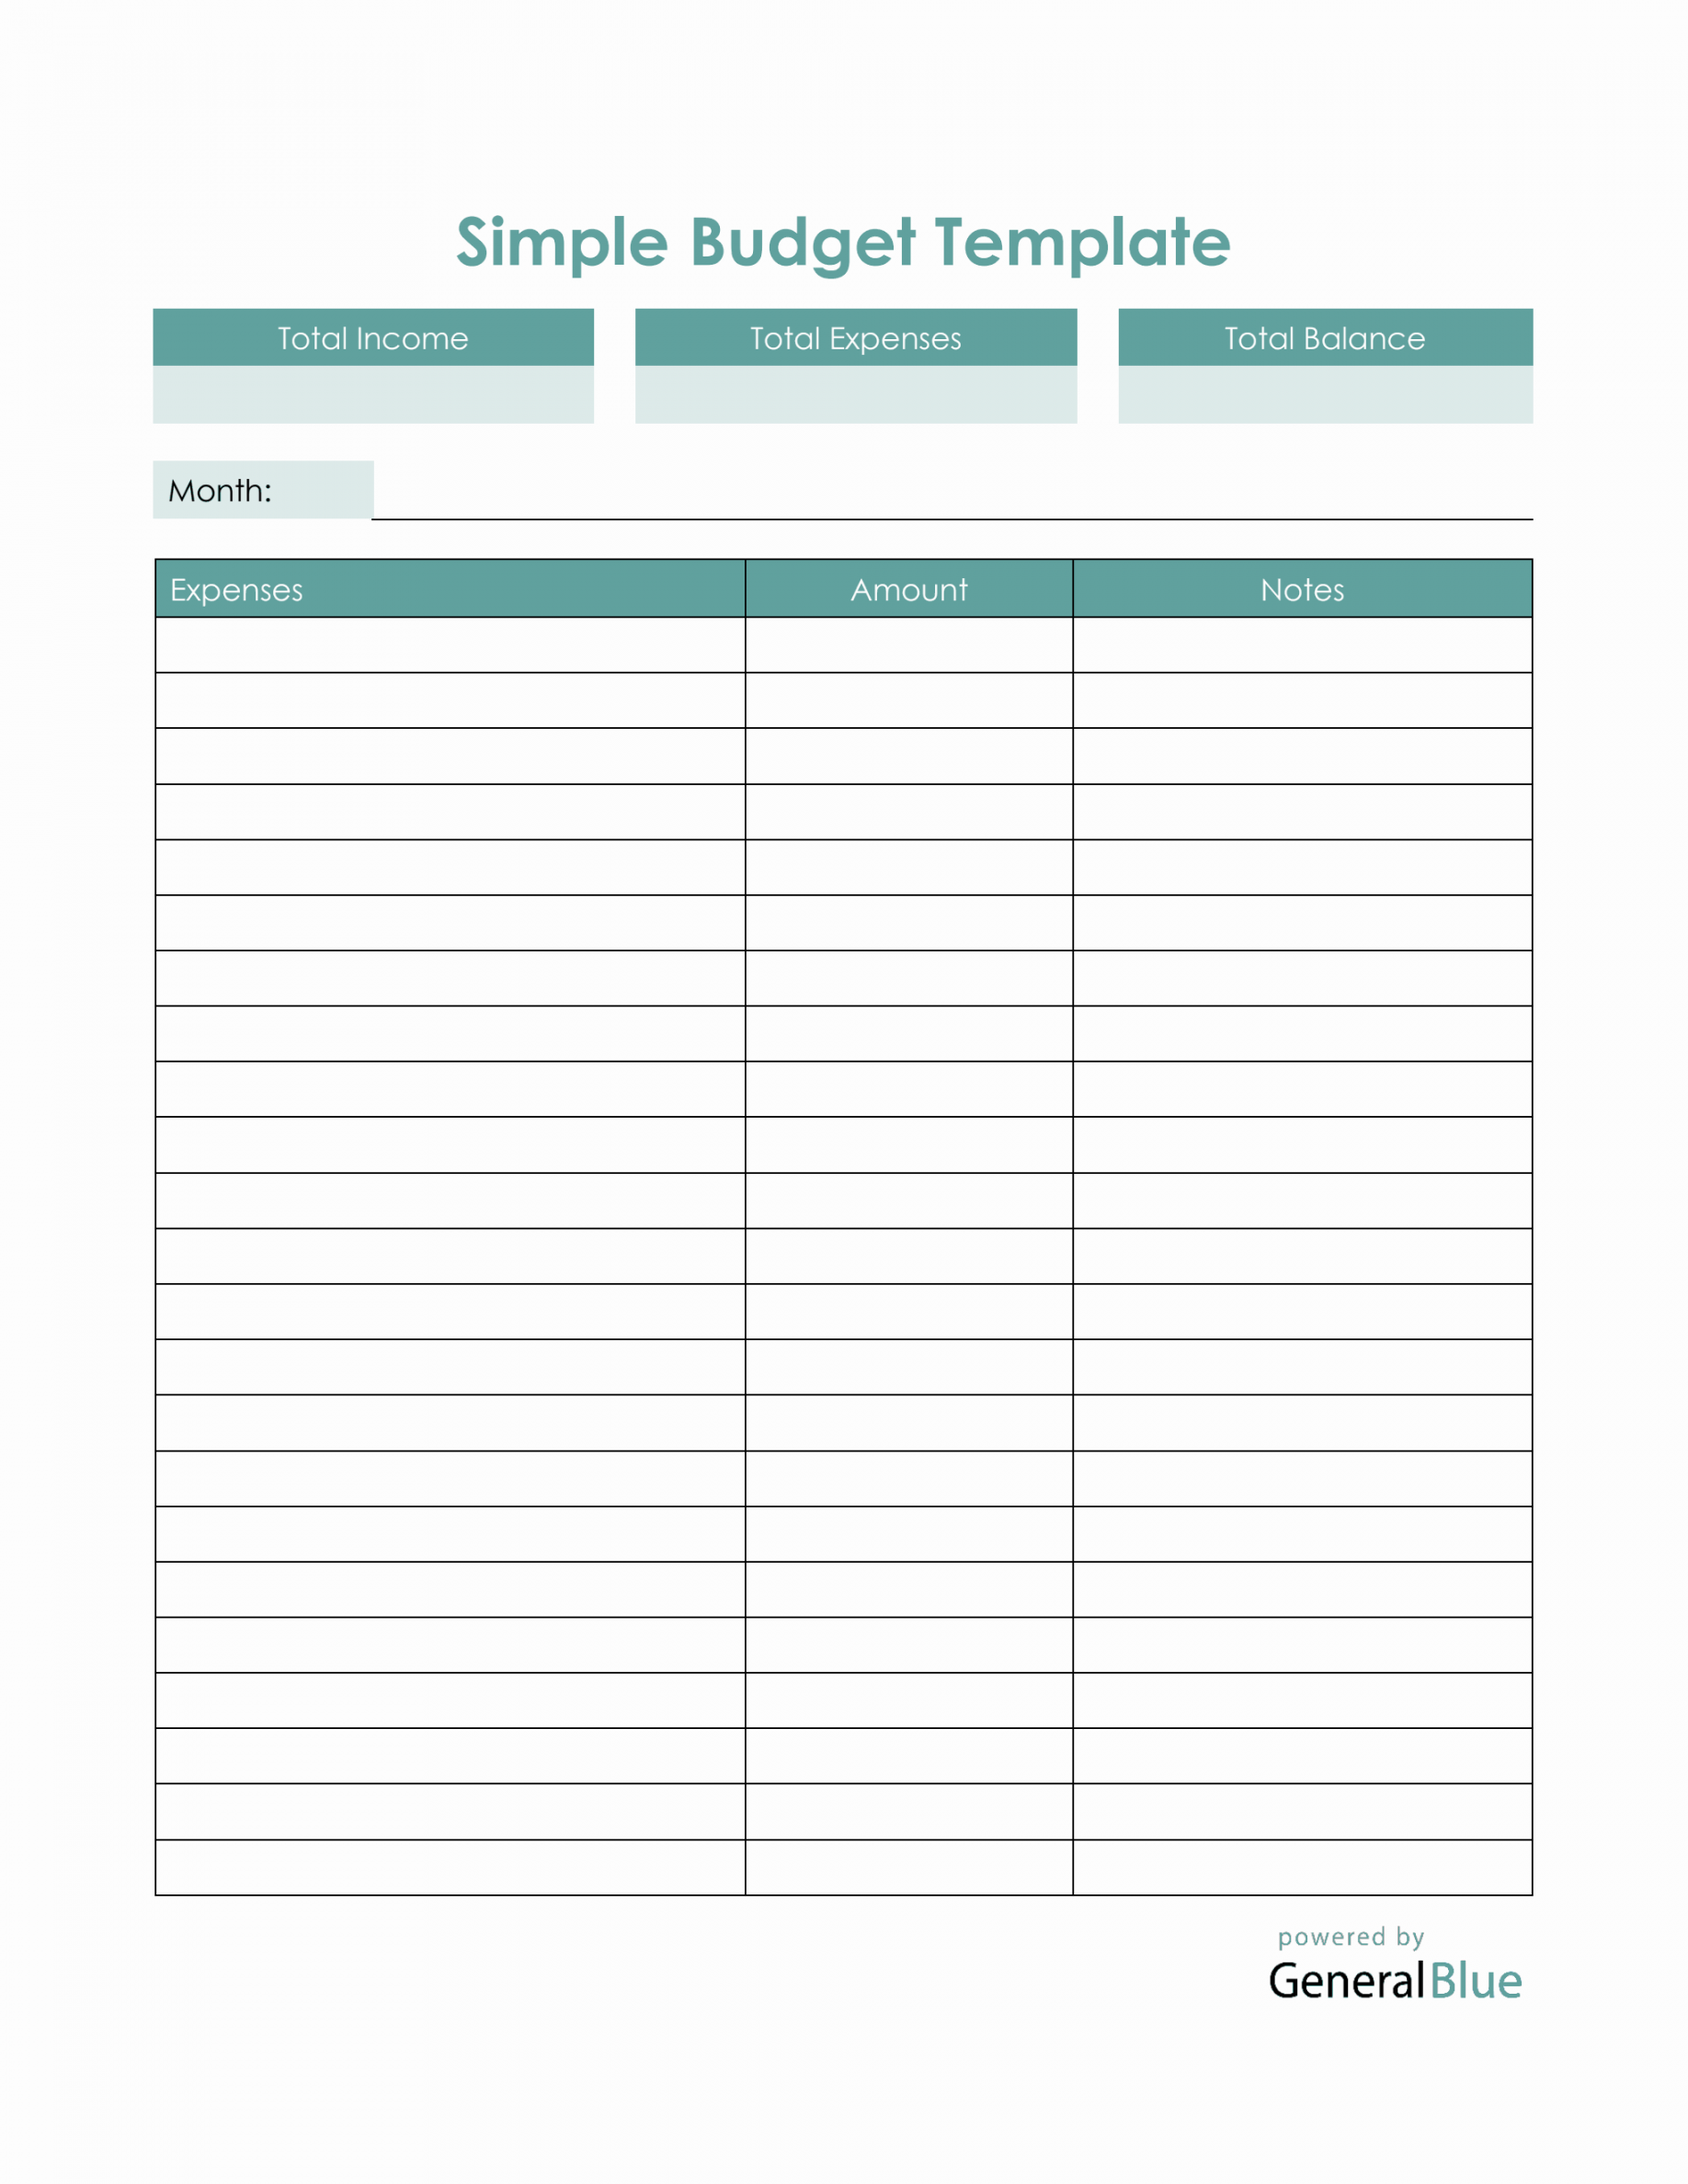 Simple Budget Template in PDF